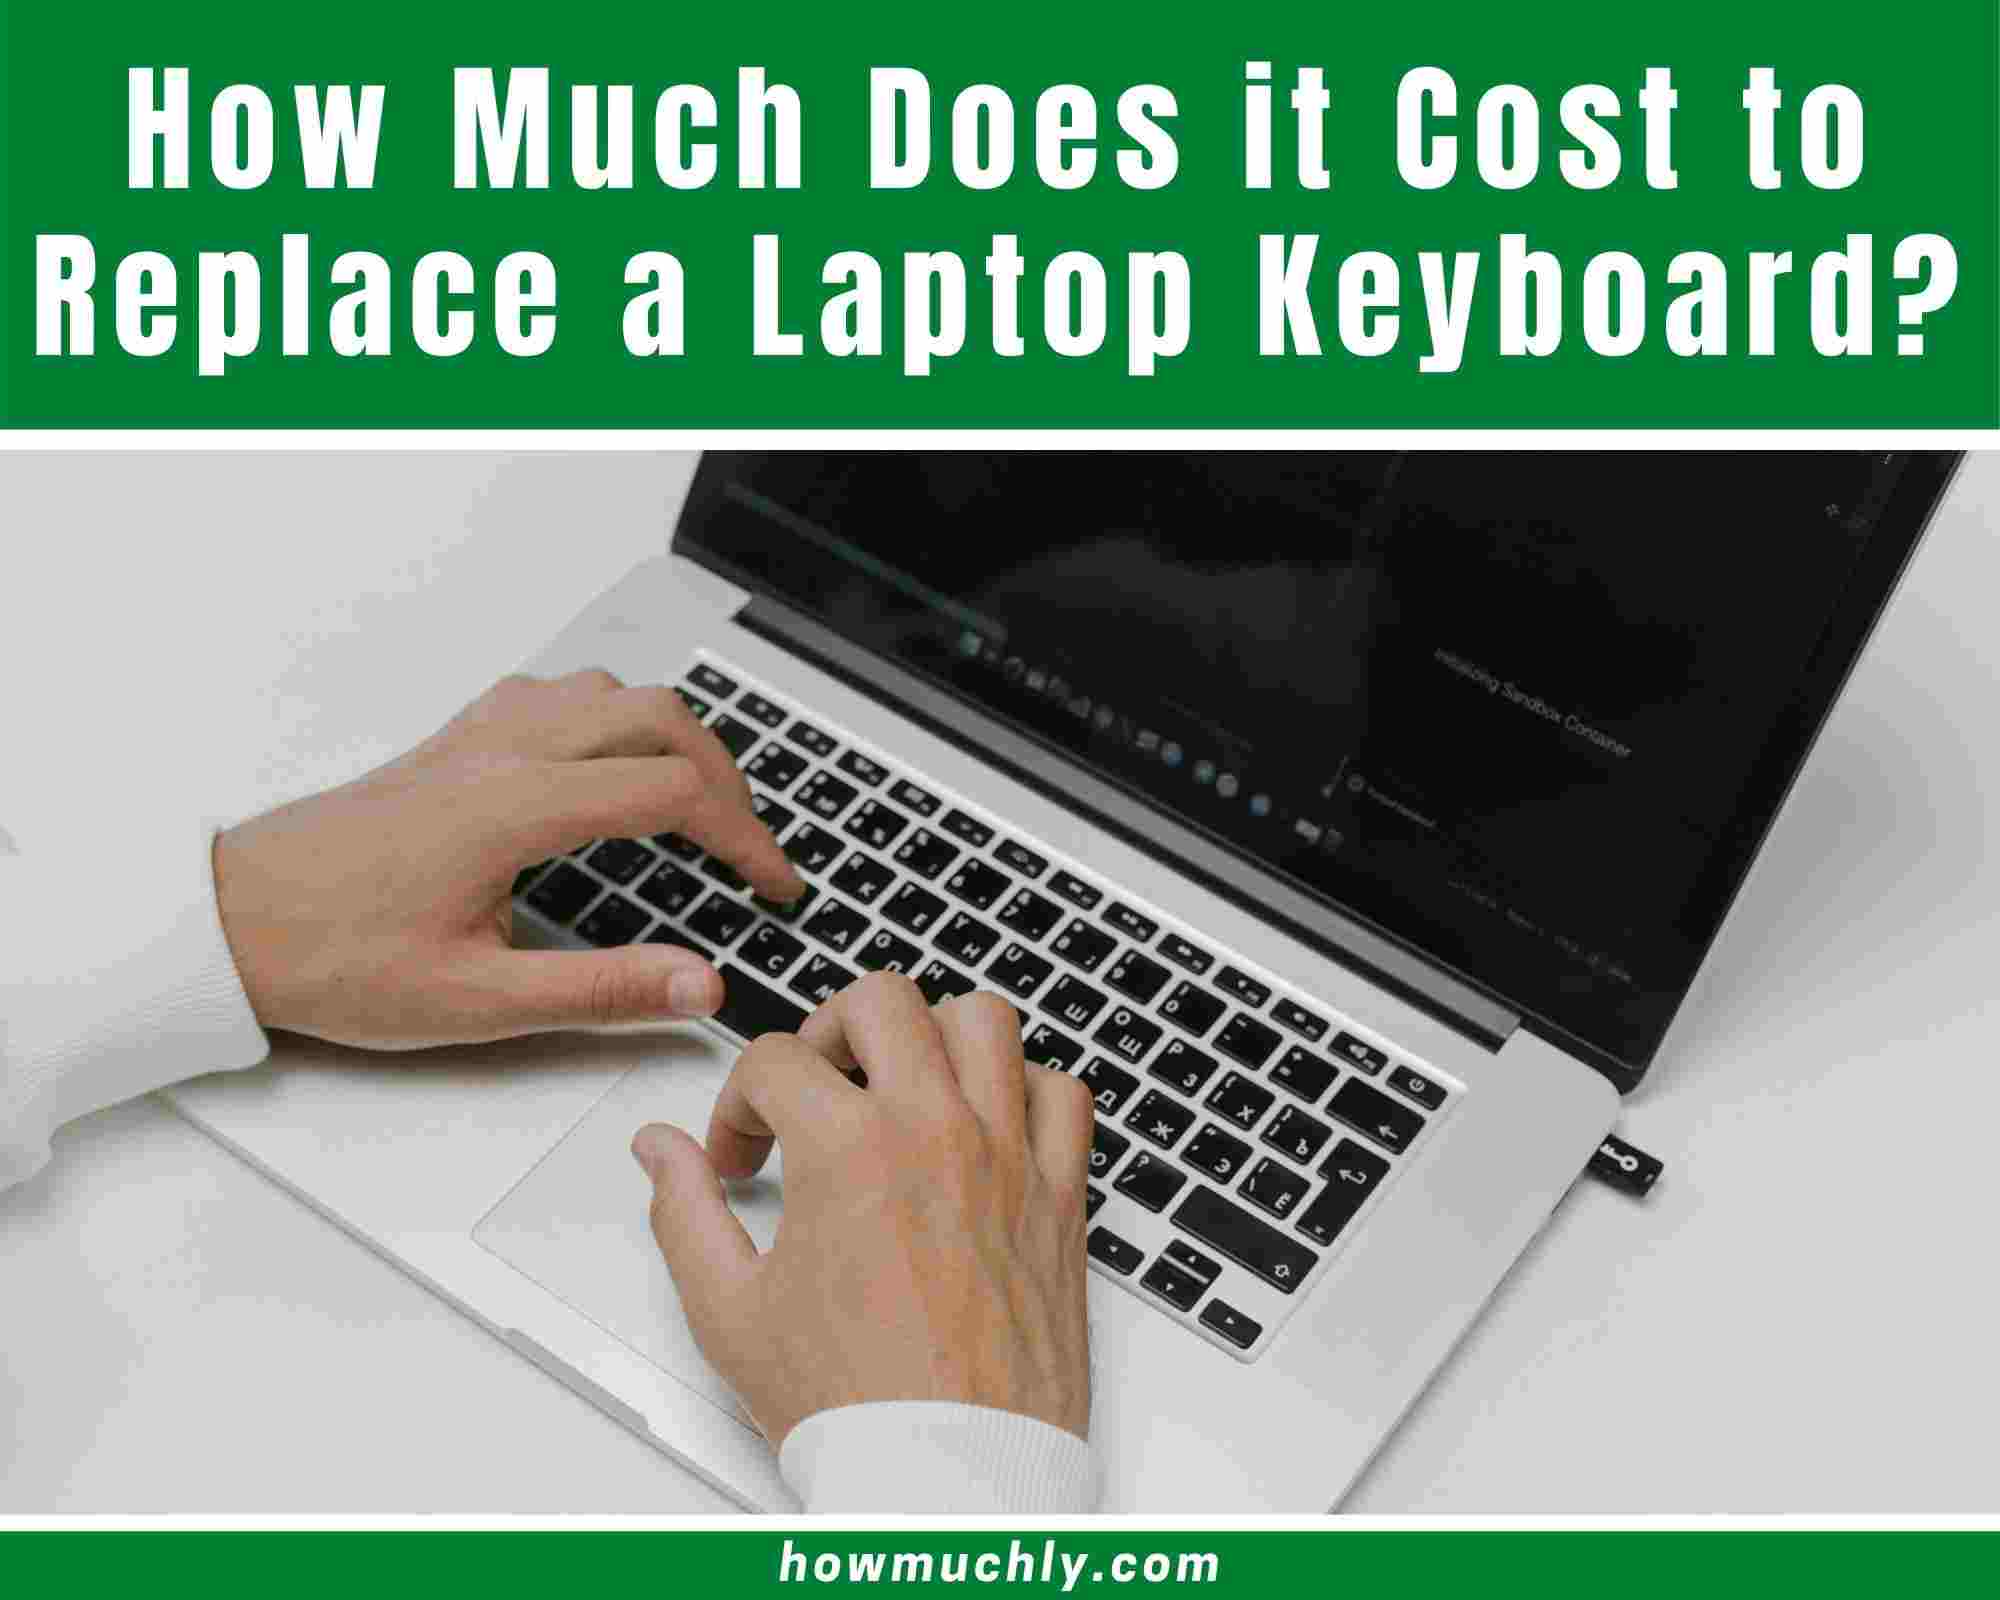 How Much Does it Cost to Replace a Laptop Keyboard? [2022]